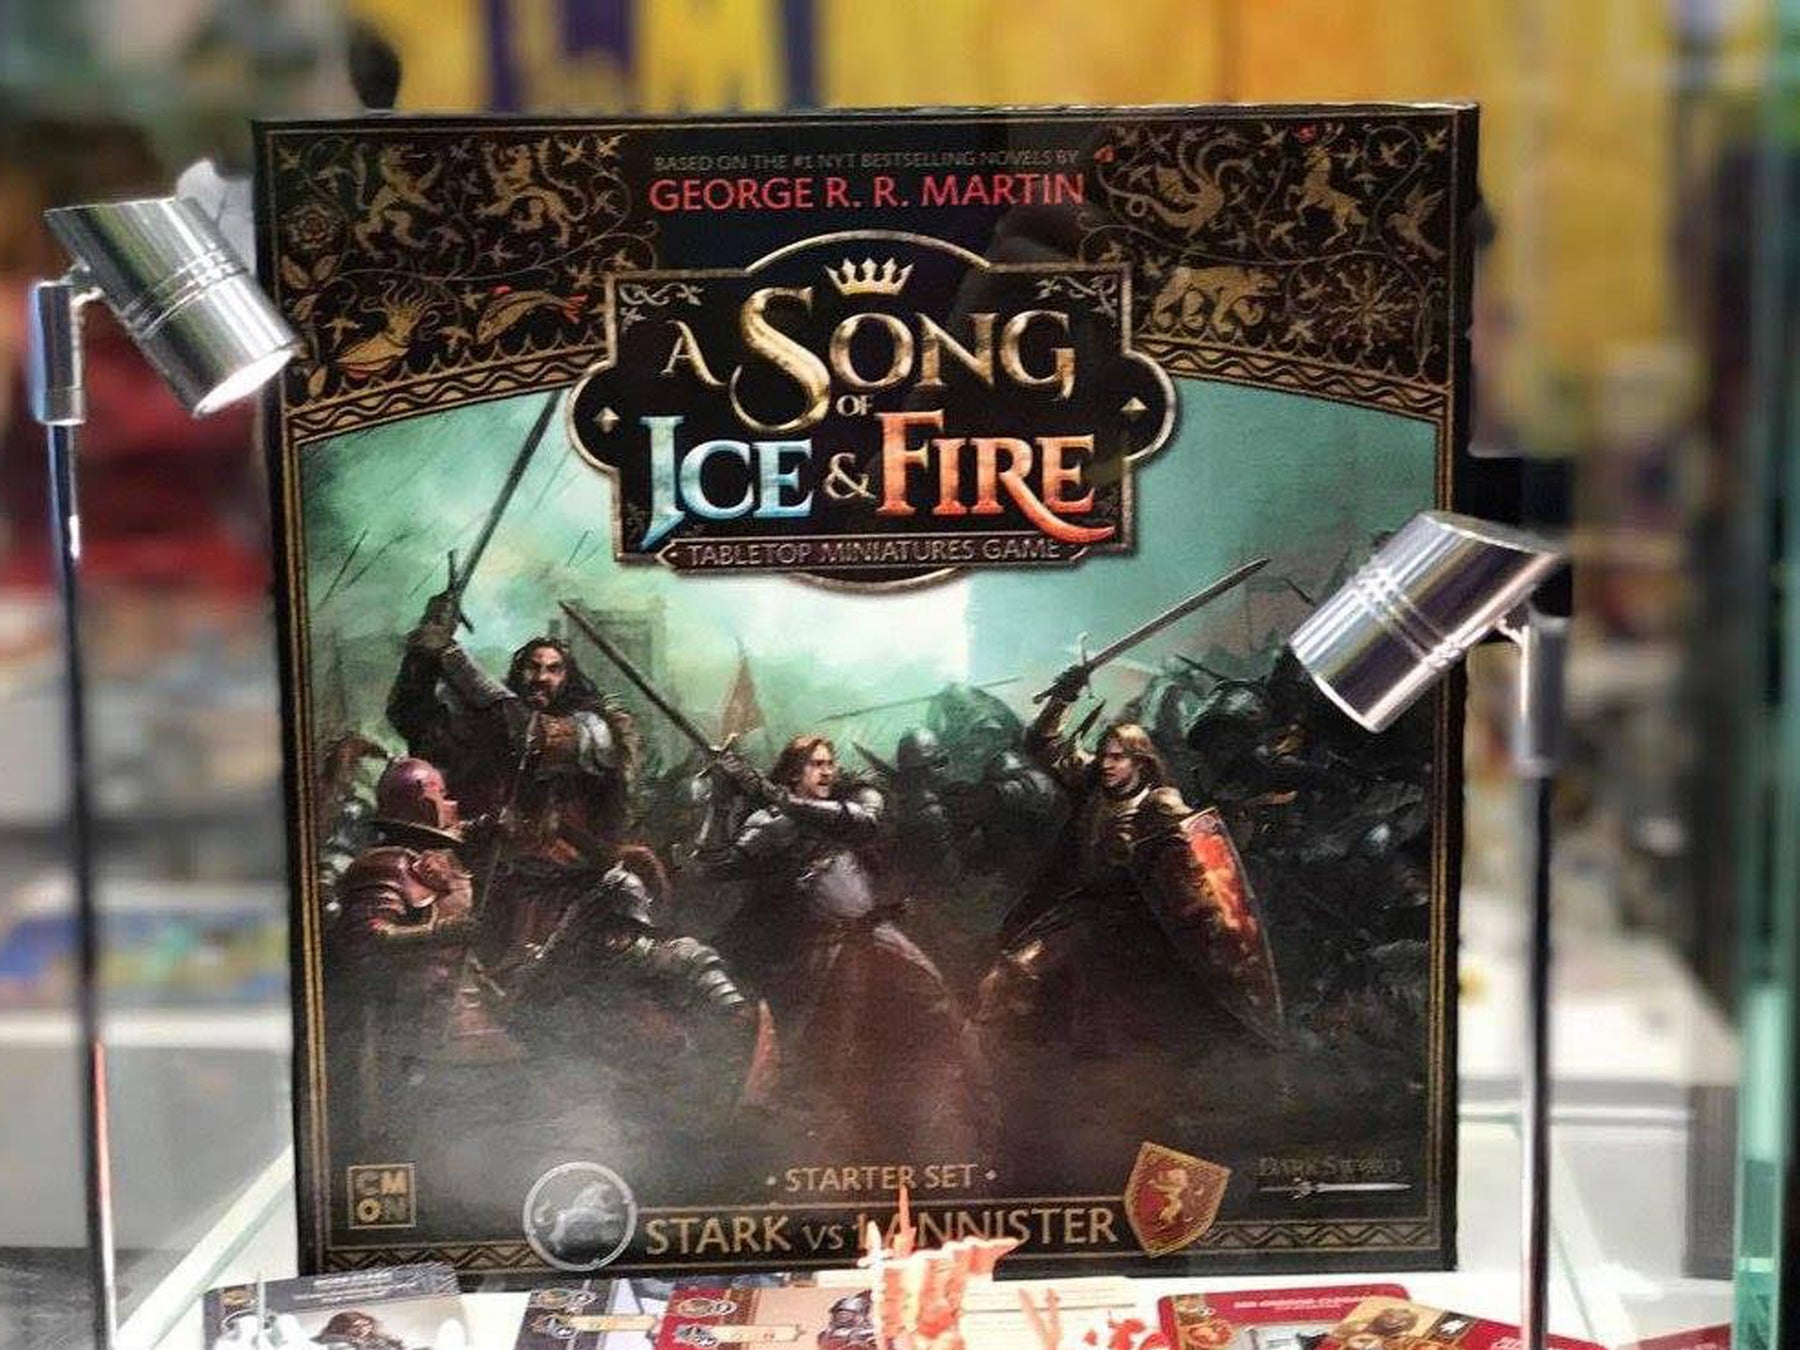 A Game of Thrones Miniatures Game Announced, A Song of Ice & Fire